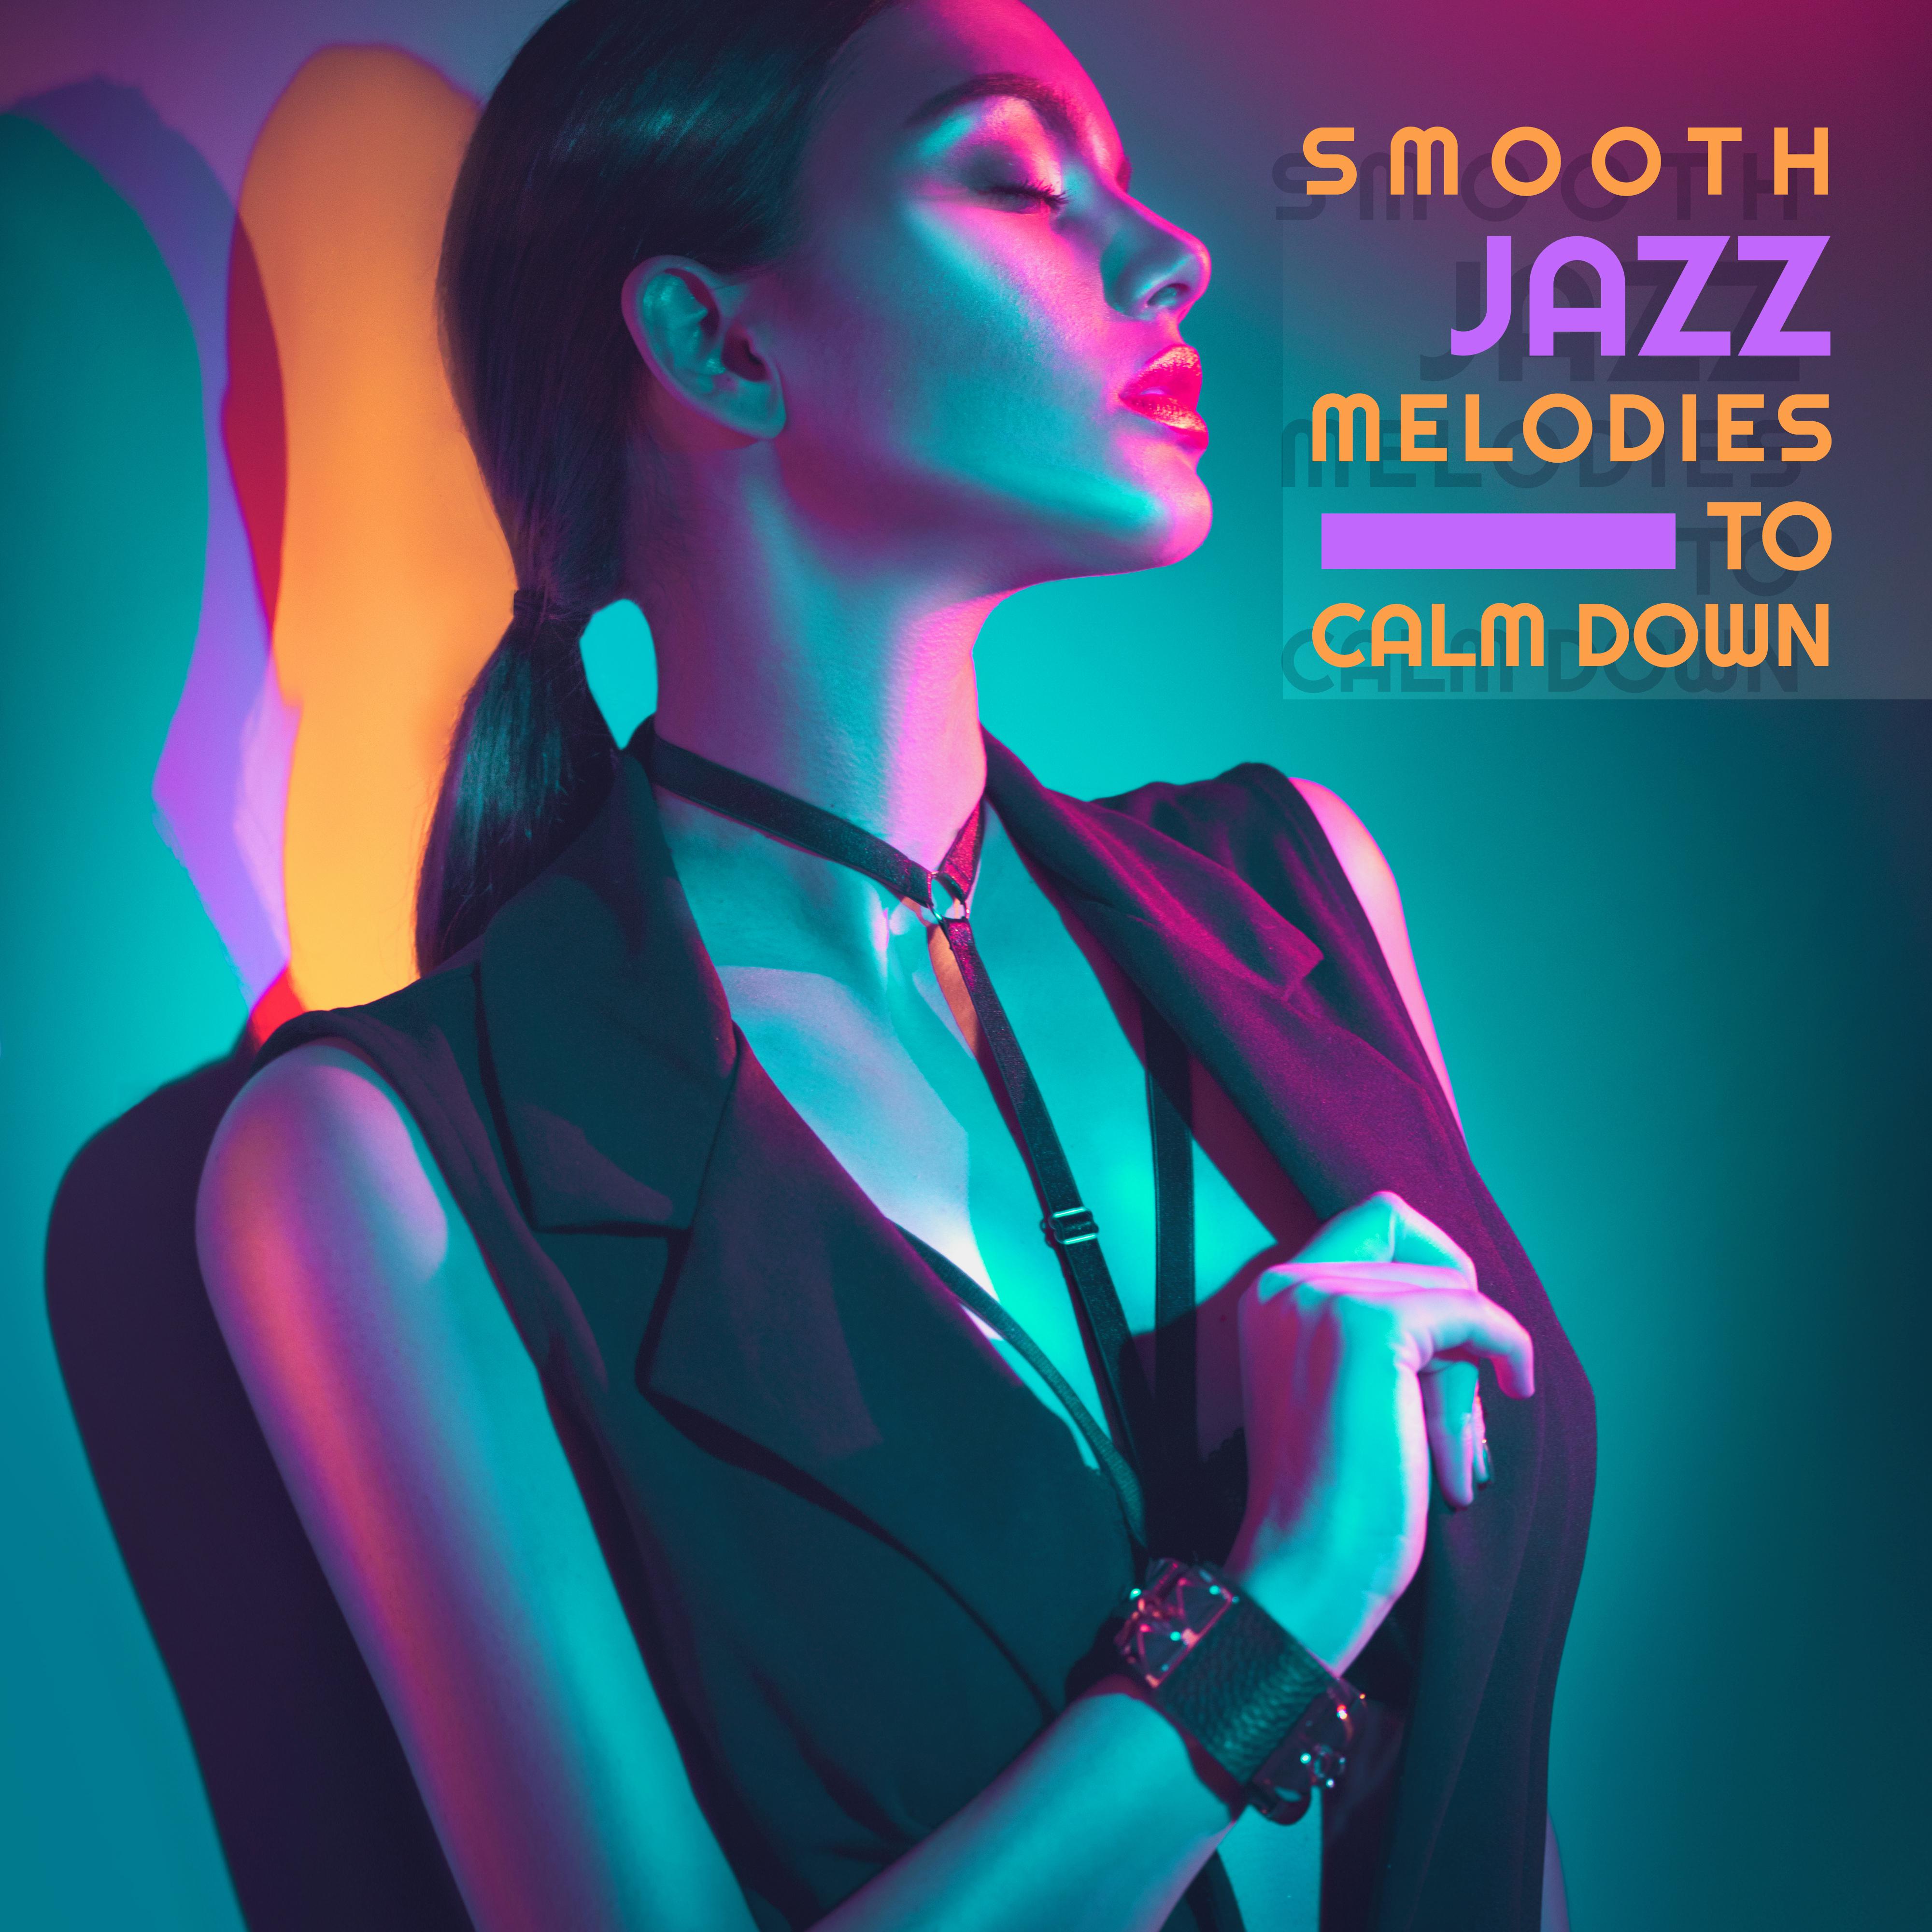 Smooth Jazz Melodies to Calm Down